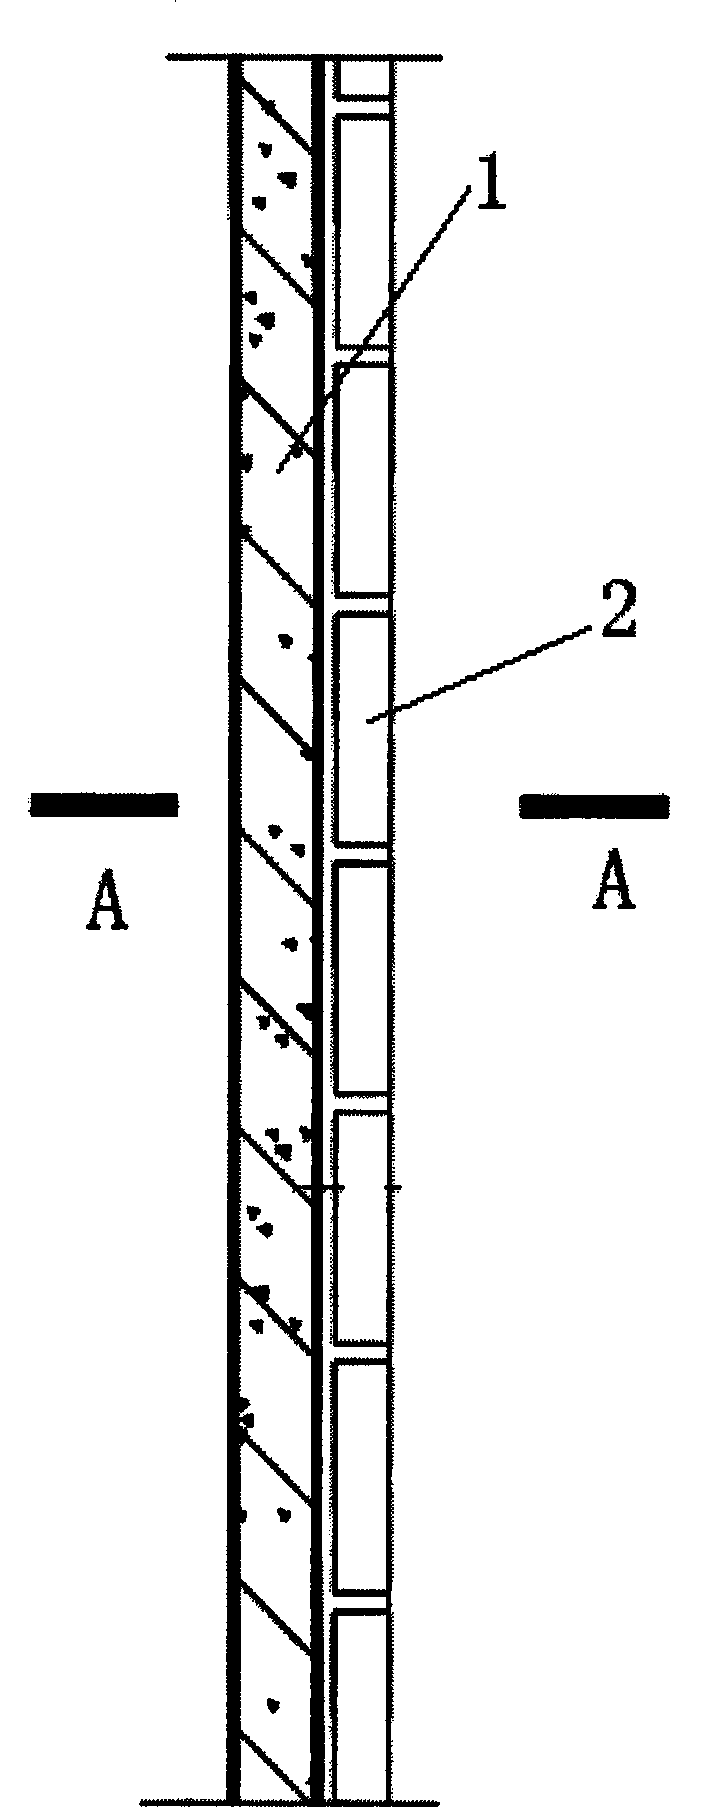 Single-barrel type concrete chimney structure with thermal insulation and anti-corrosion layer